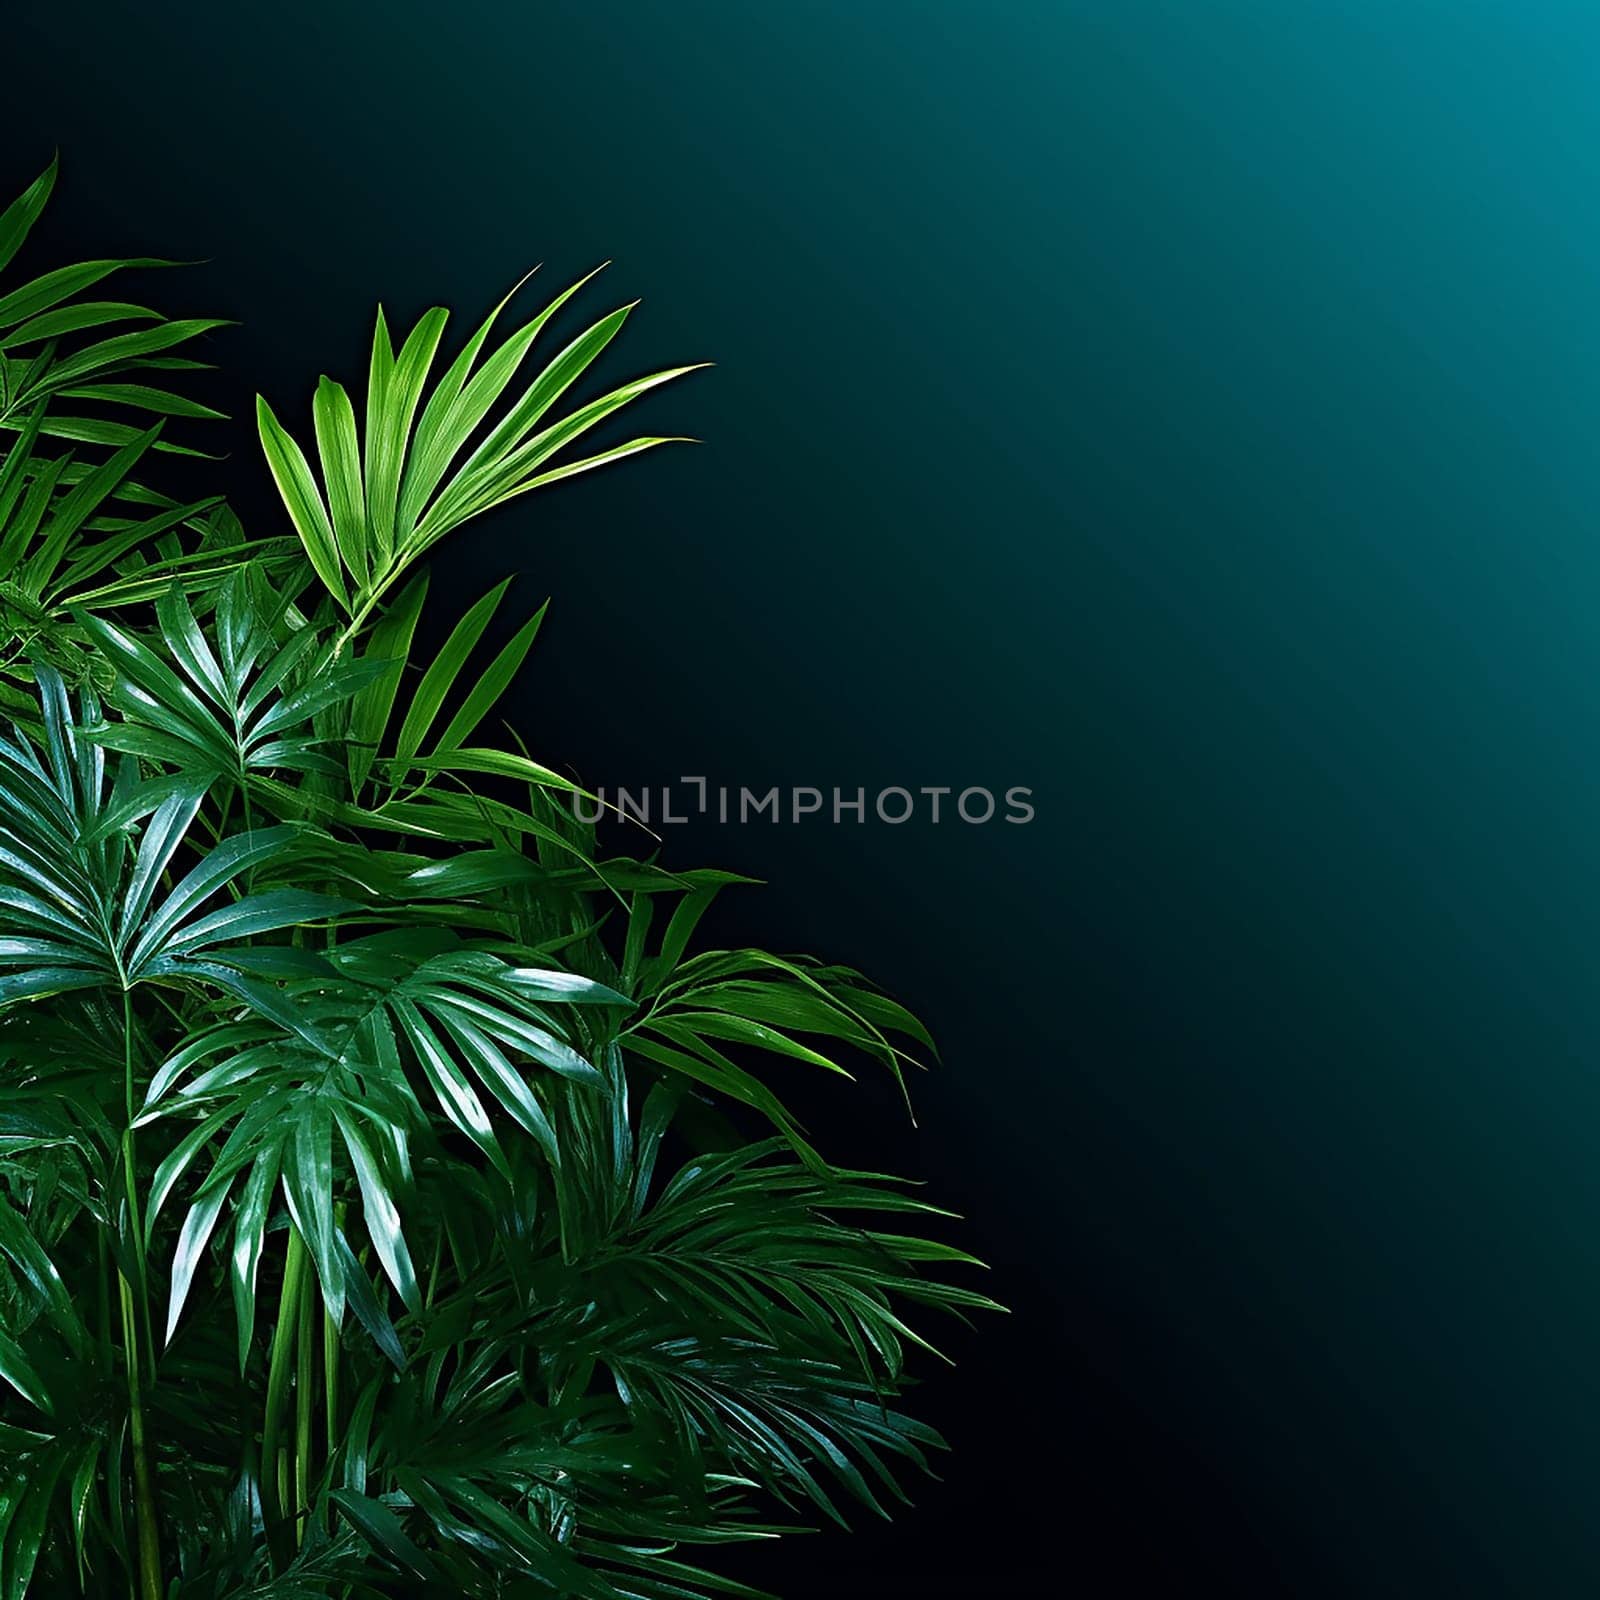 Green tropical leaves on a dark background.